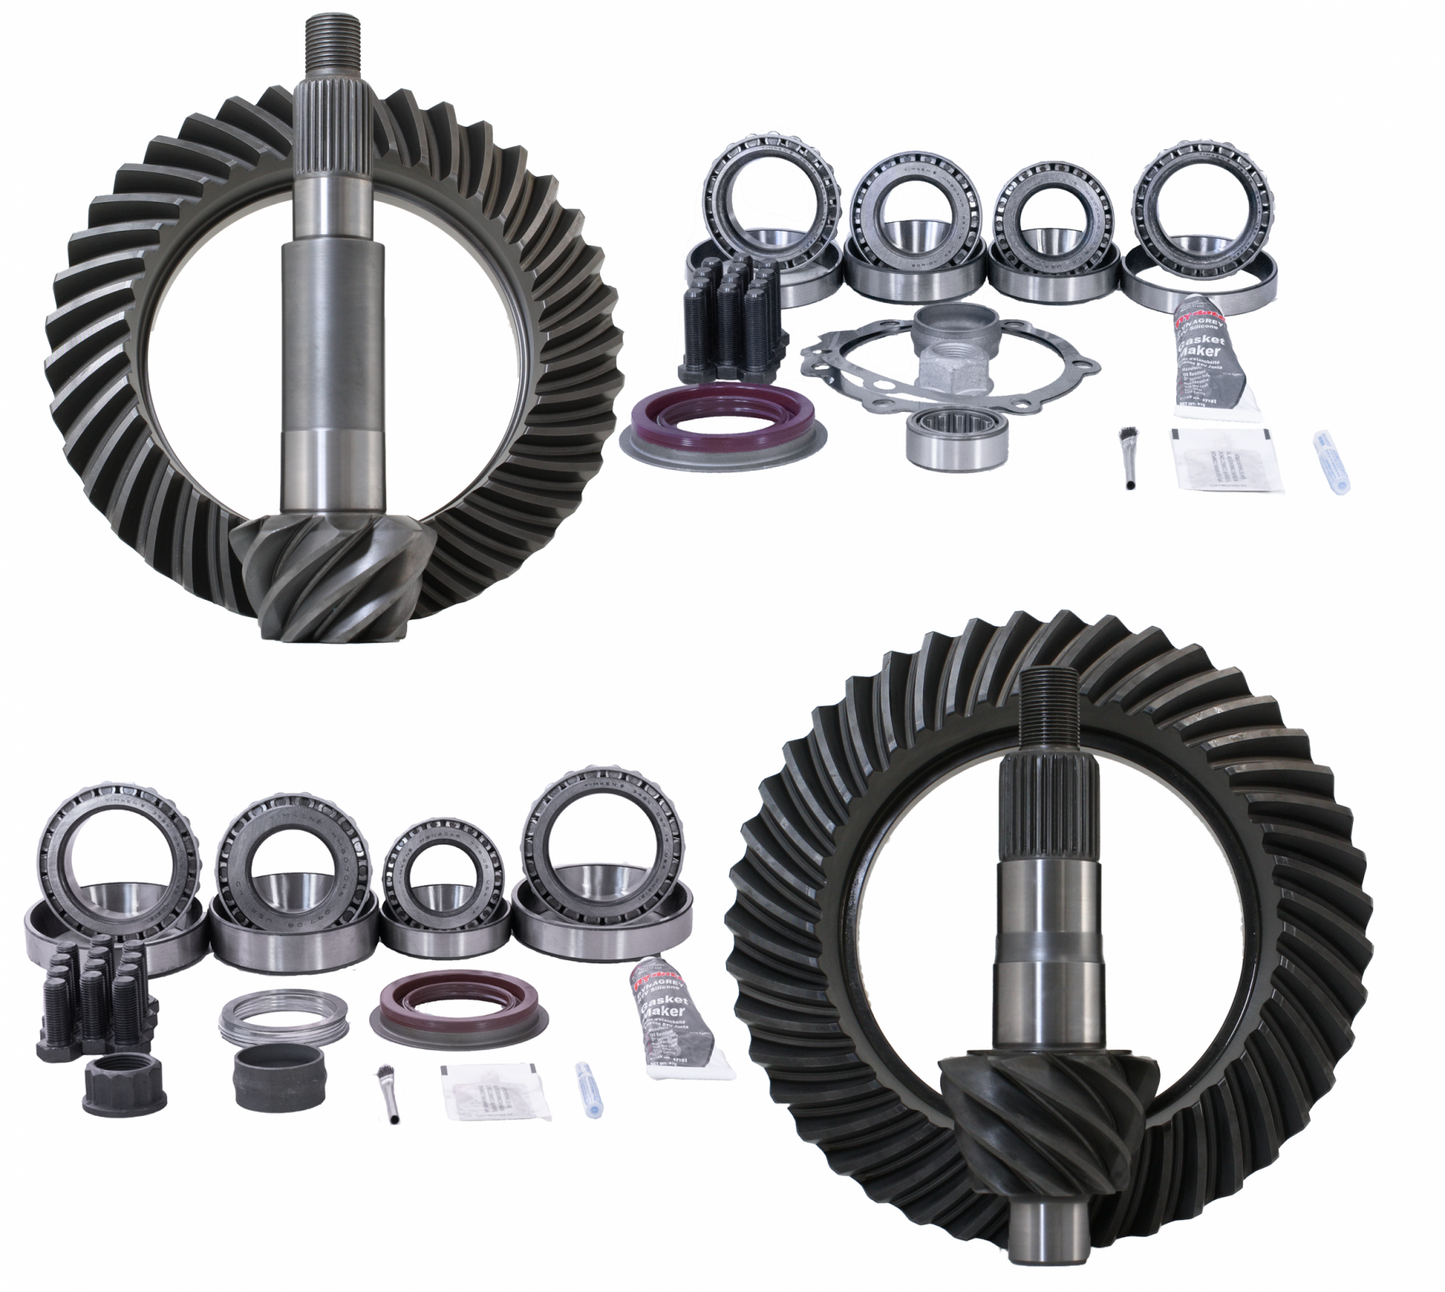 5.38 Ratio Gear Package (GM 10.5 14-Bolt Thick 88-Down - Ford D60 Thick Reverse Rotation) with Koyo Master Kits Revolution Gear and Axle